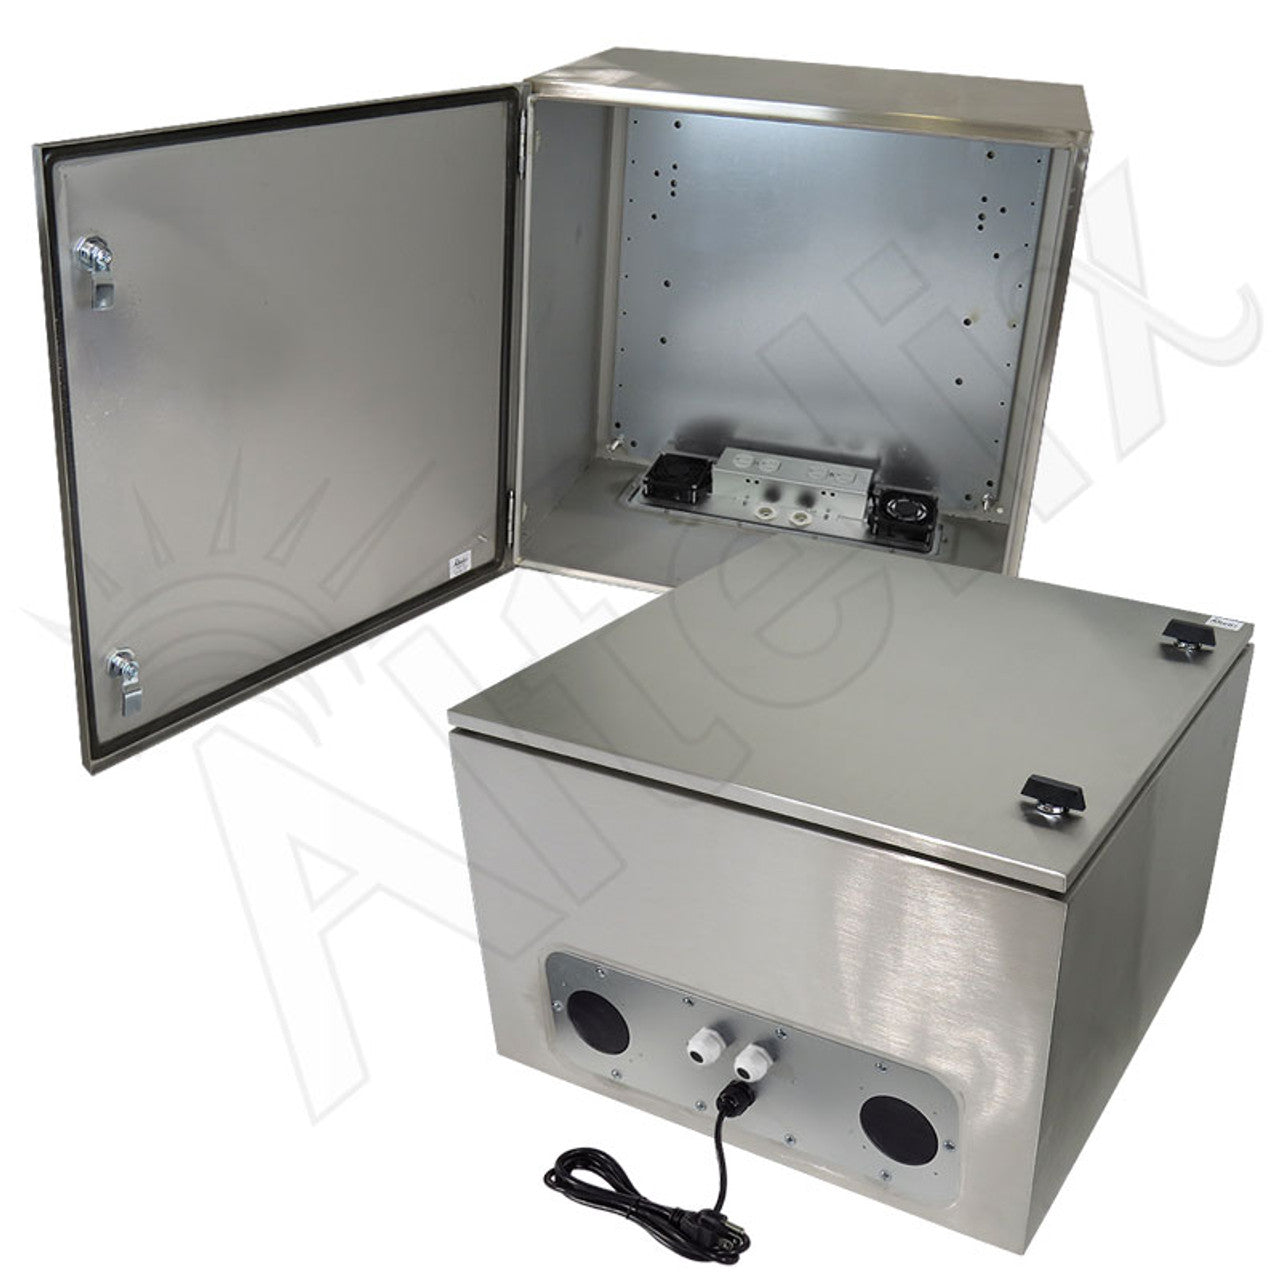 Altelix Stainless Steel Weatherproof NEMA Enclosure with Dual Cooling Fans, 120 VAC Outlets and Power Cord